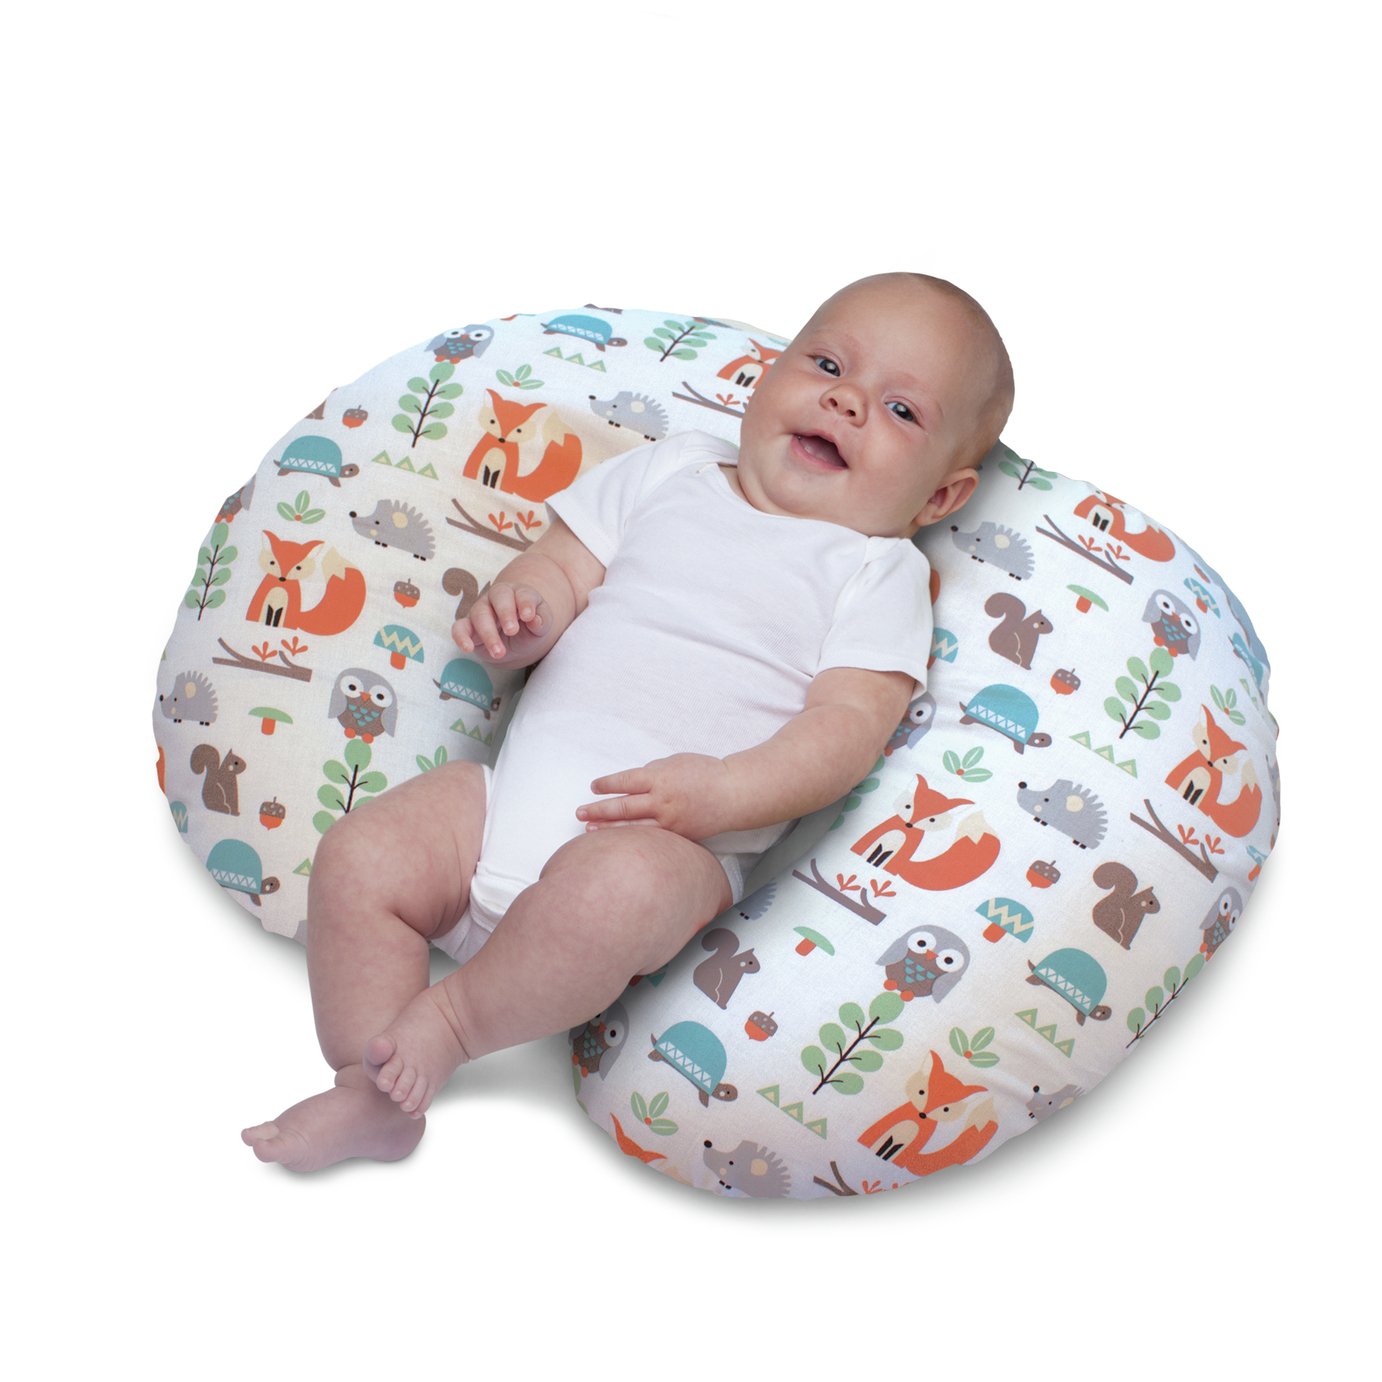 Chicco Boppy Pregnancy and Baby Nursing Pillow Review